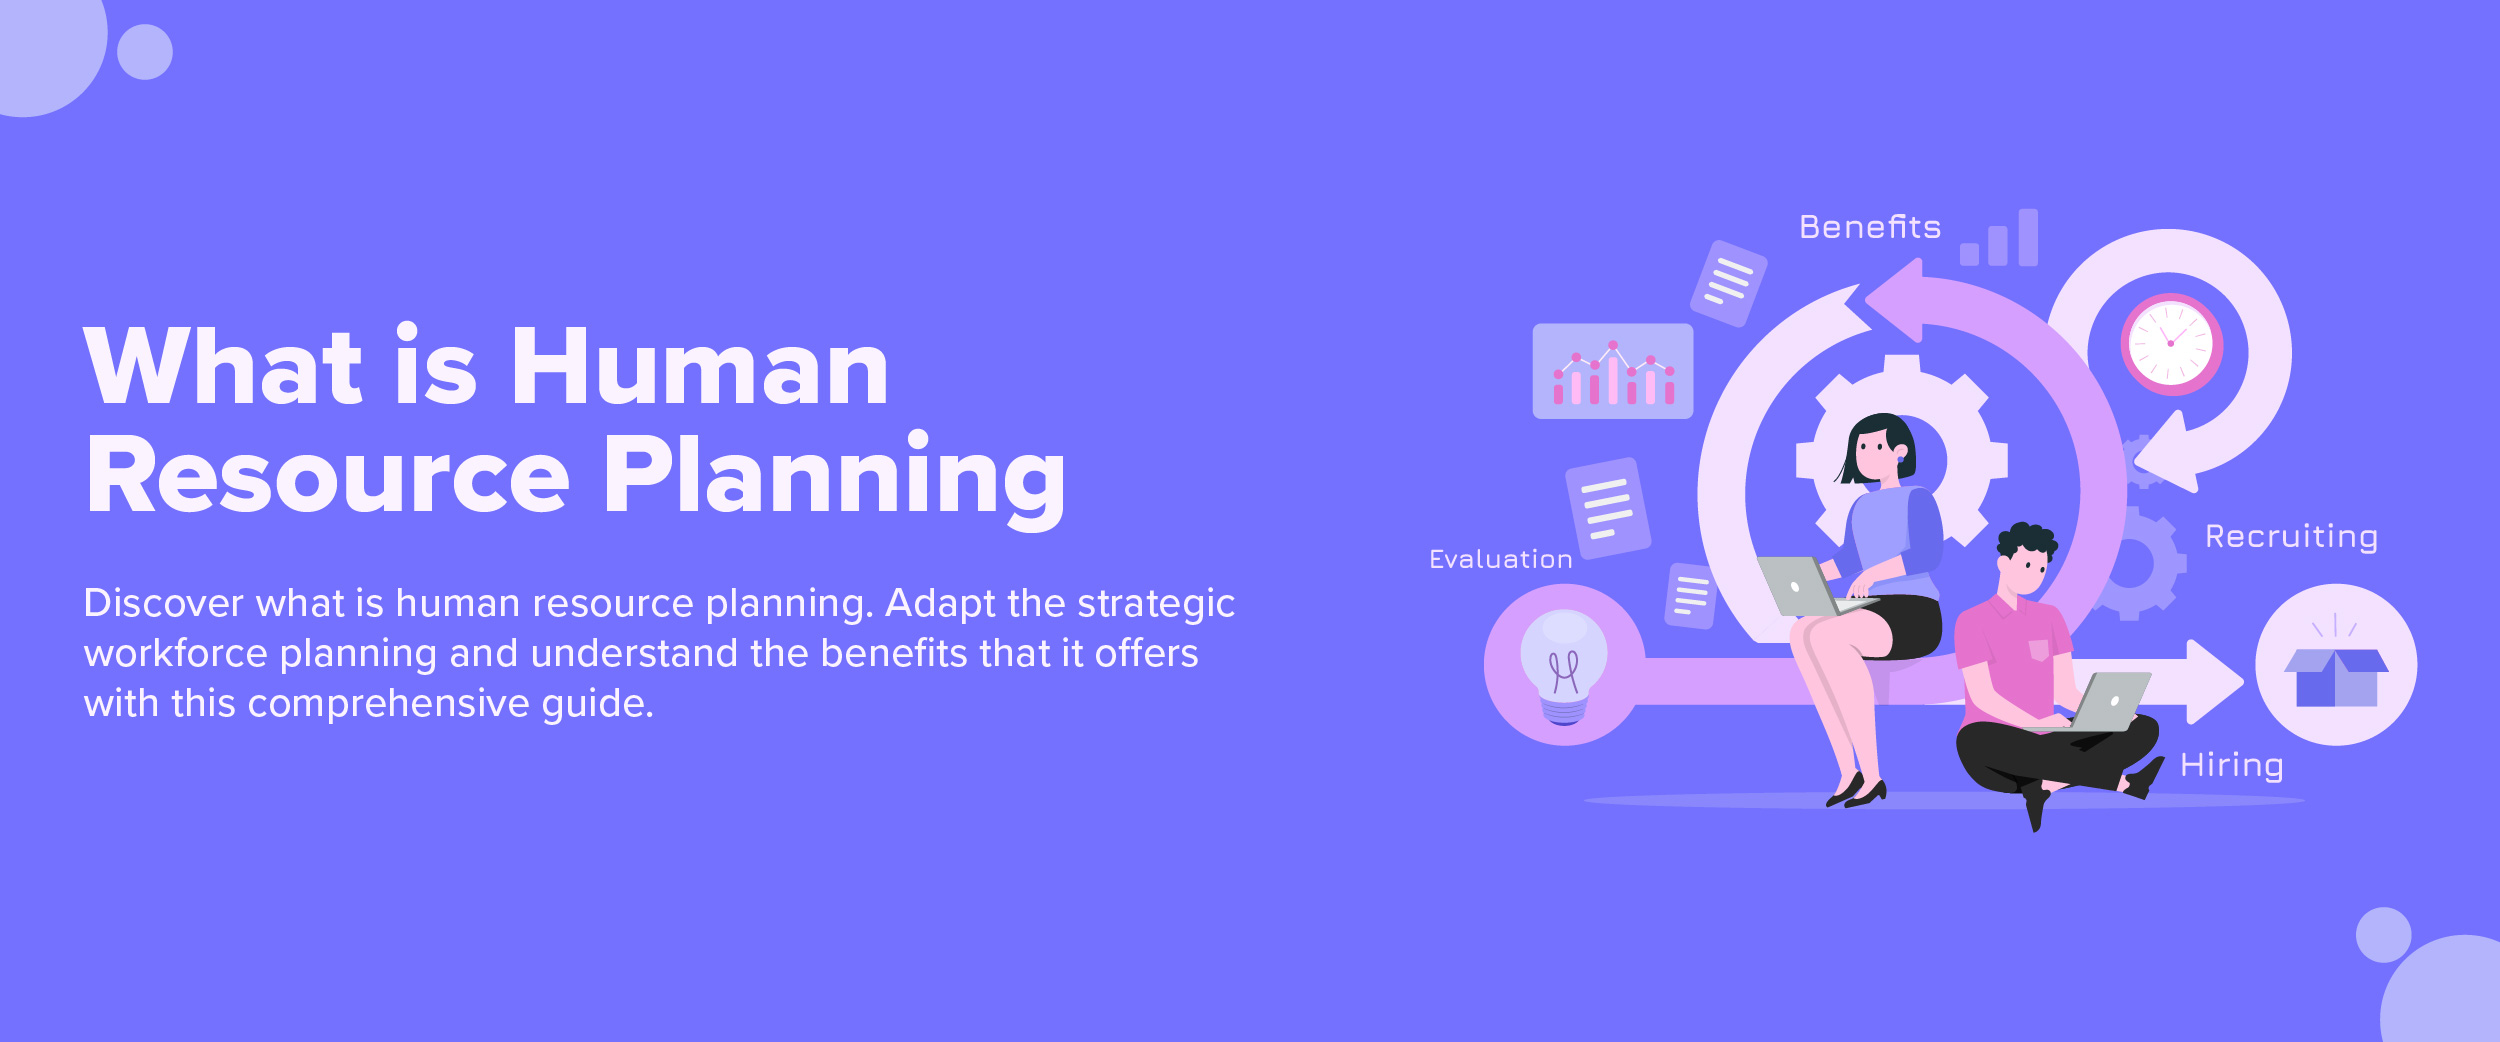 what is human resource planning